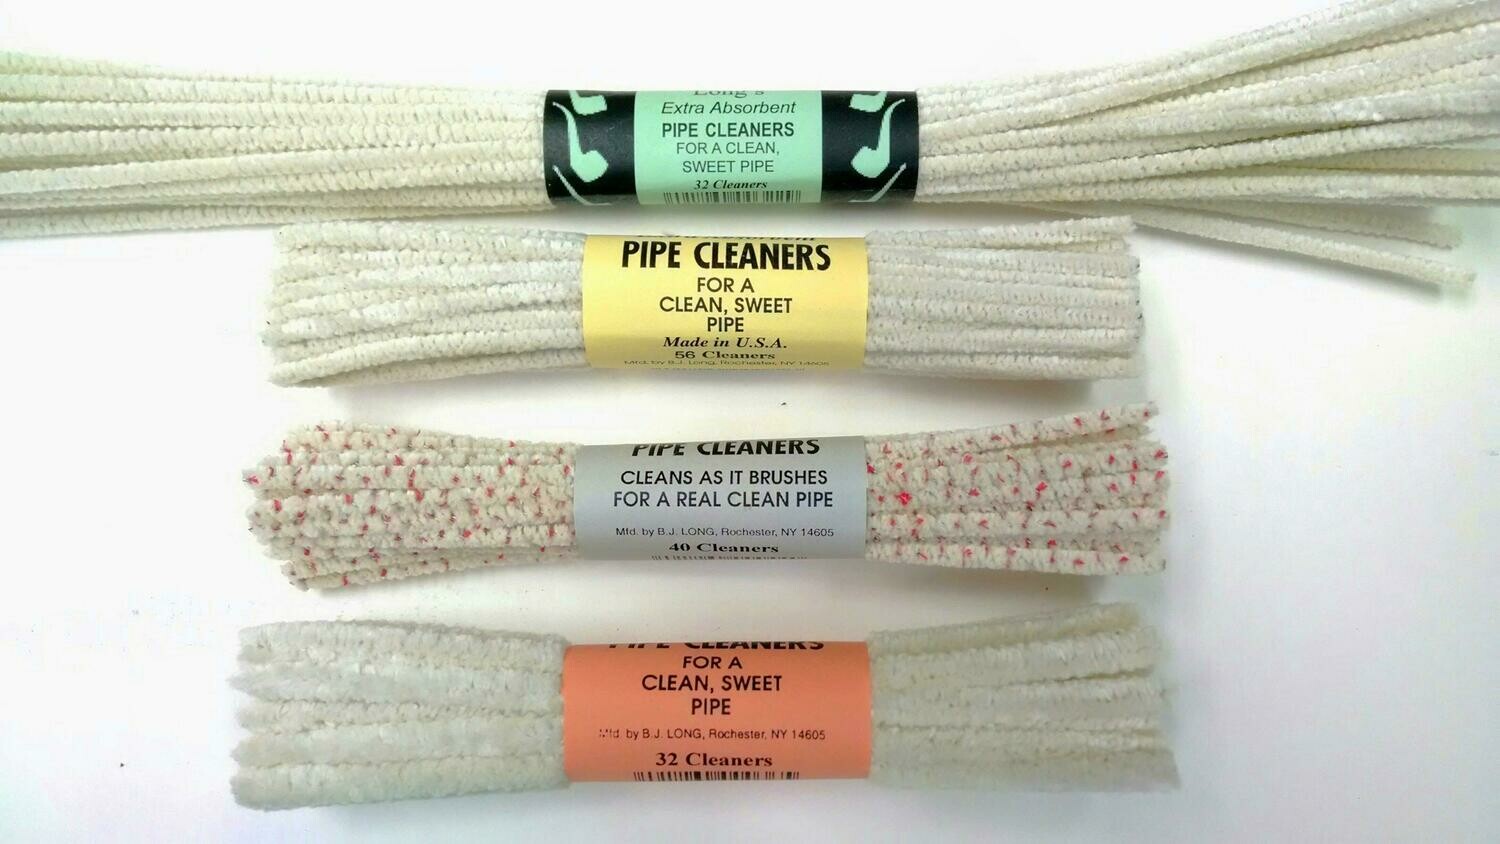 Long's Extra Absorbent Pipe Cleaners